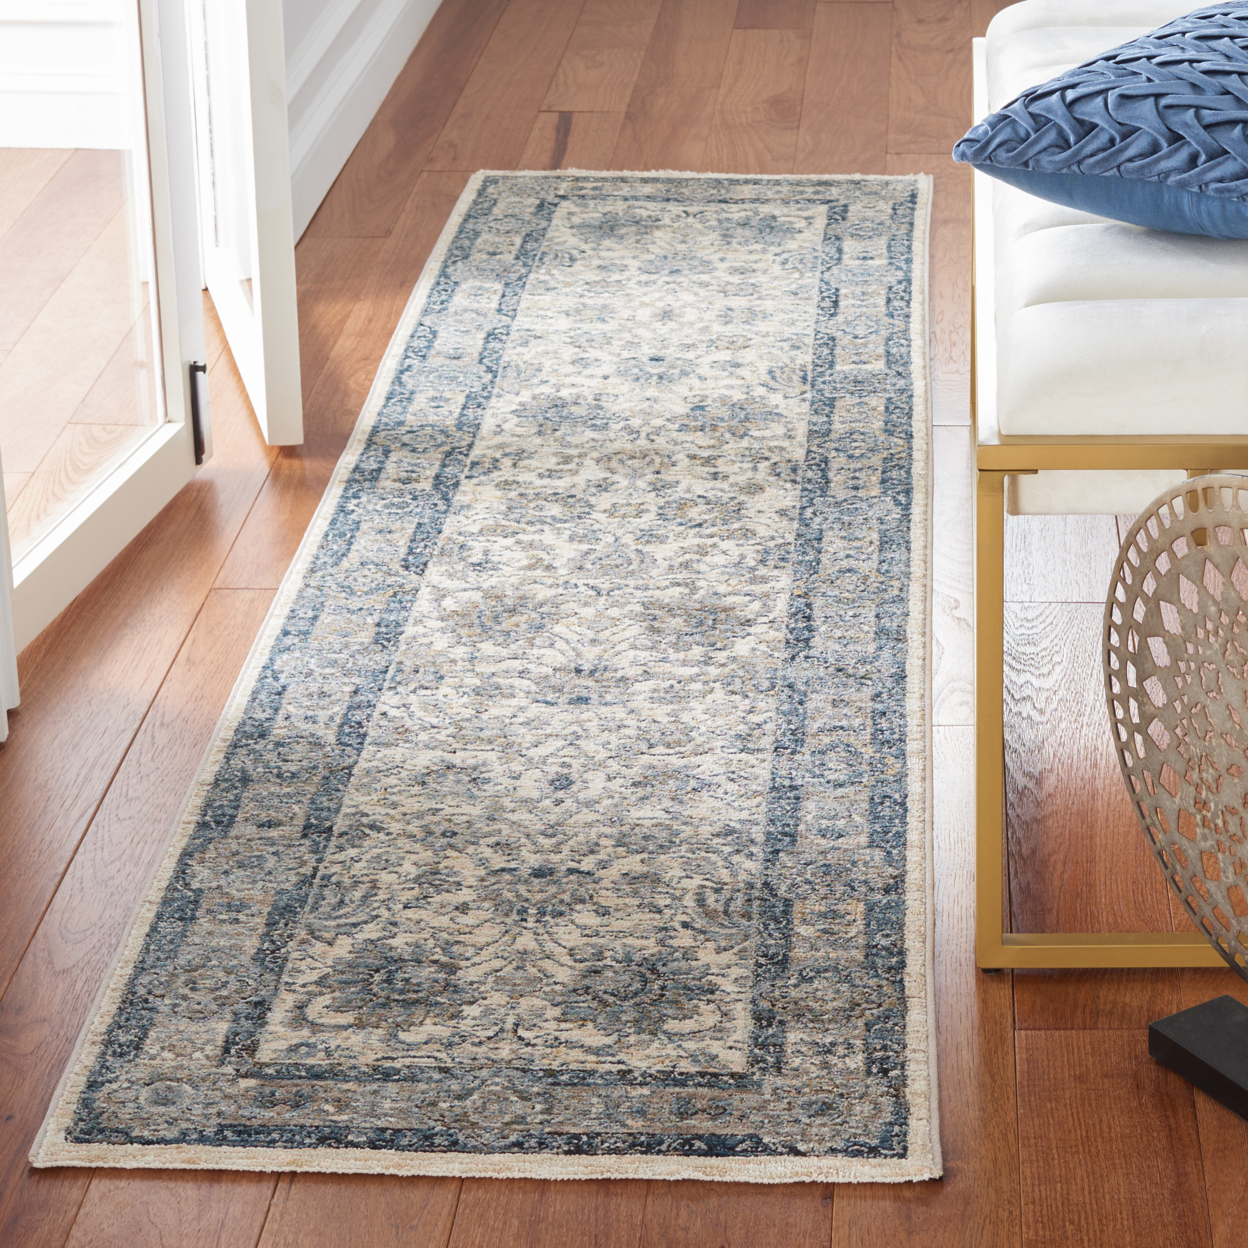 SAFAVIEH Valencia Collection VAL570A Ivory / Blue Rug - 8' X 10'